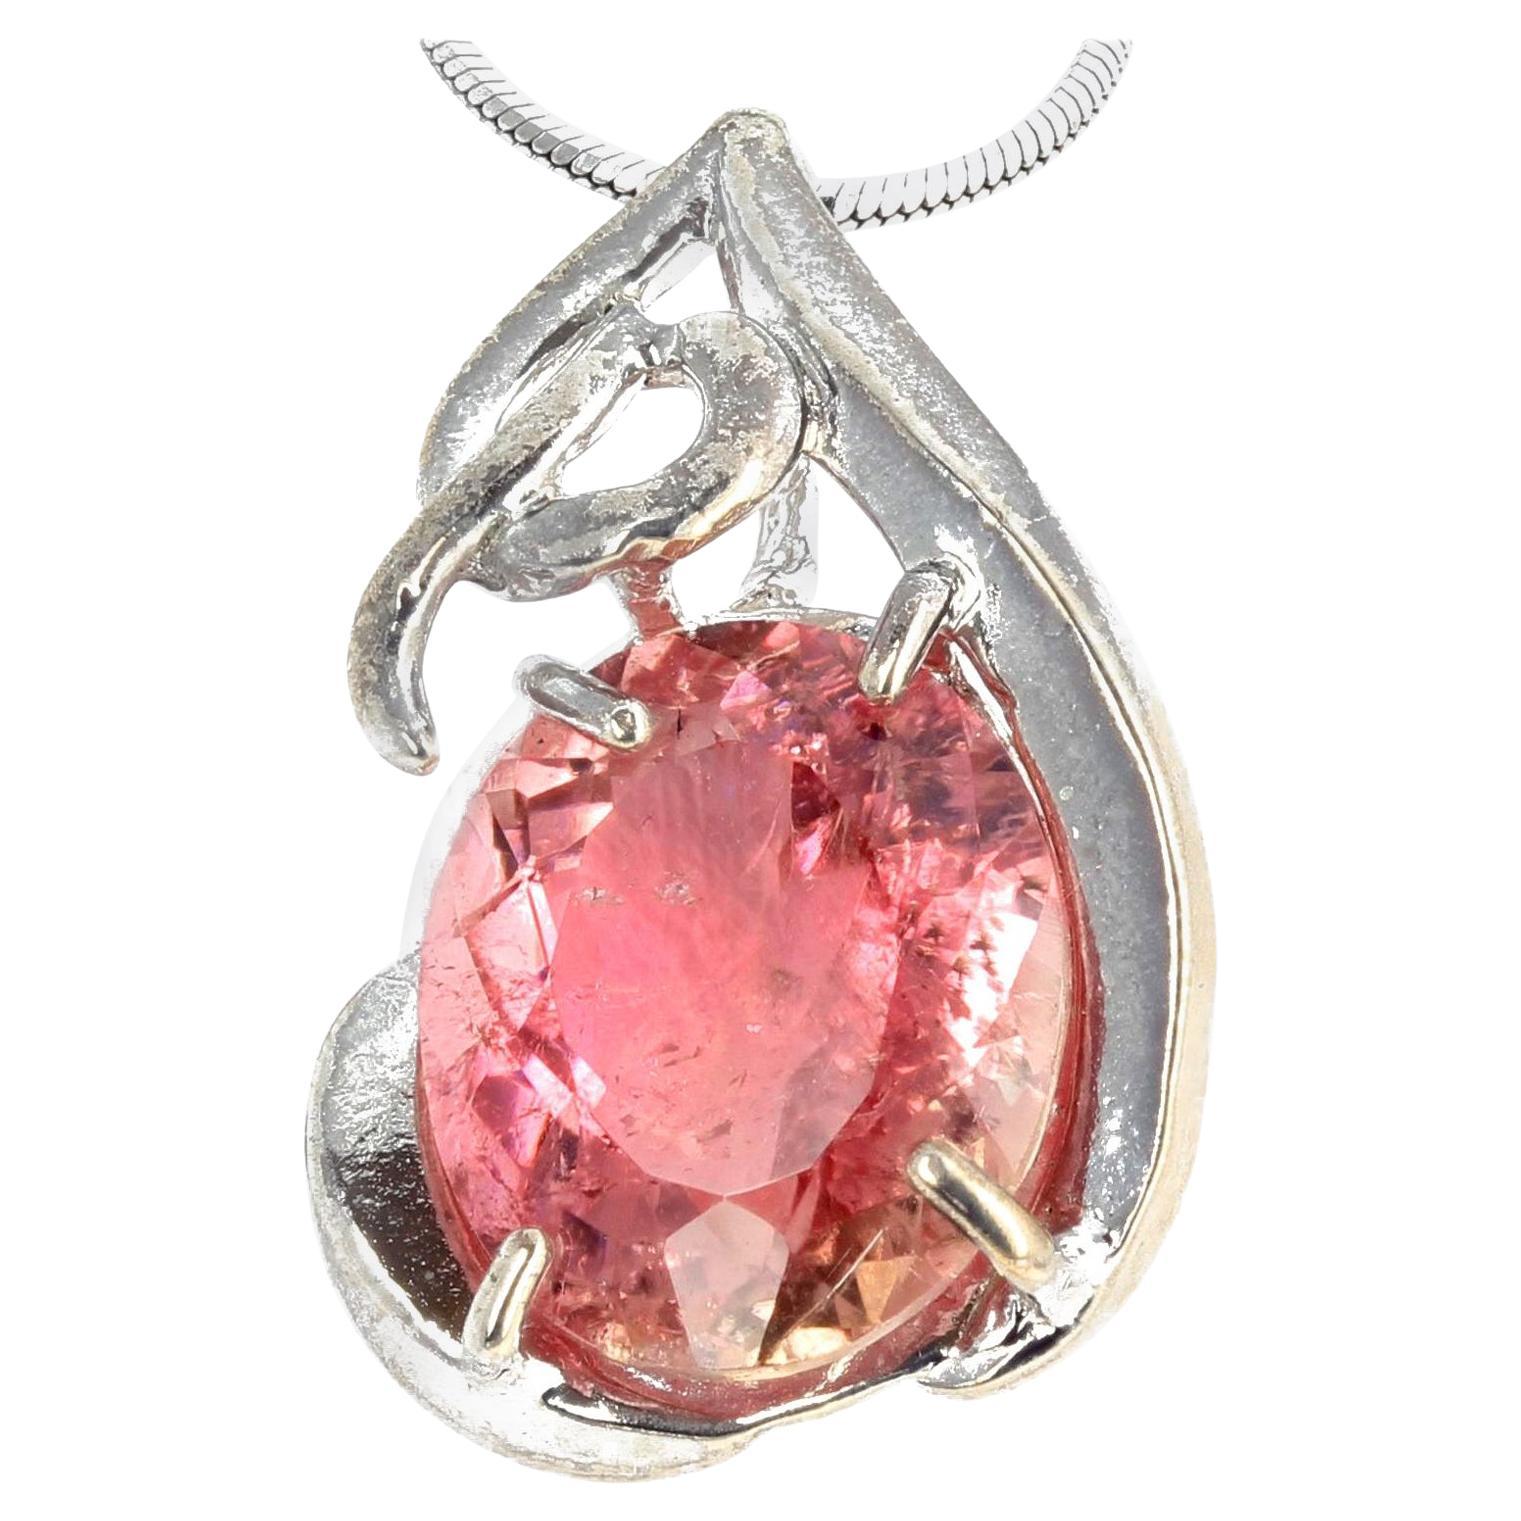 AJD Stunning 7 Cts Bright Pink/Apricot Natural Tourmaline Silver Pendant For Sale